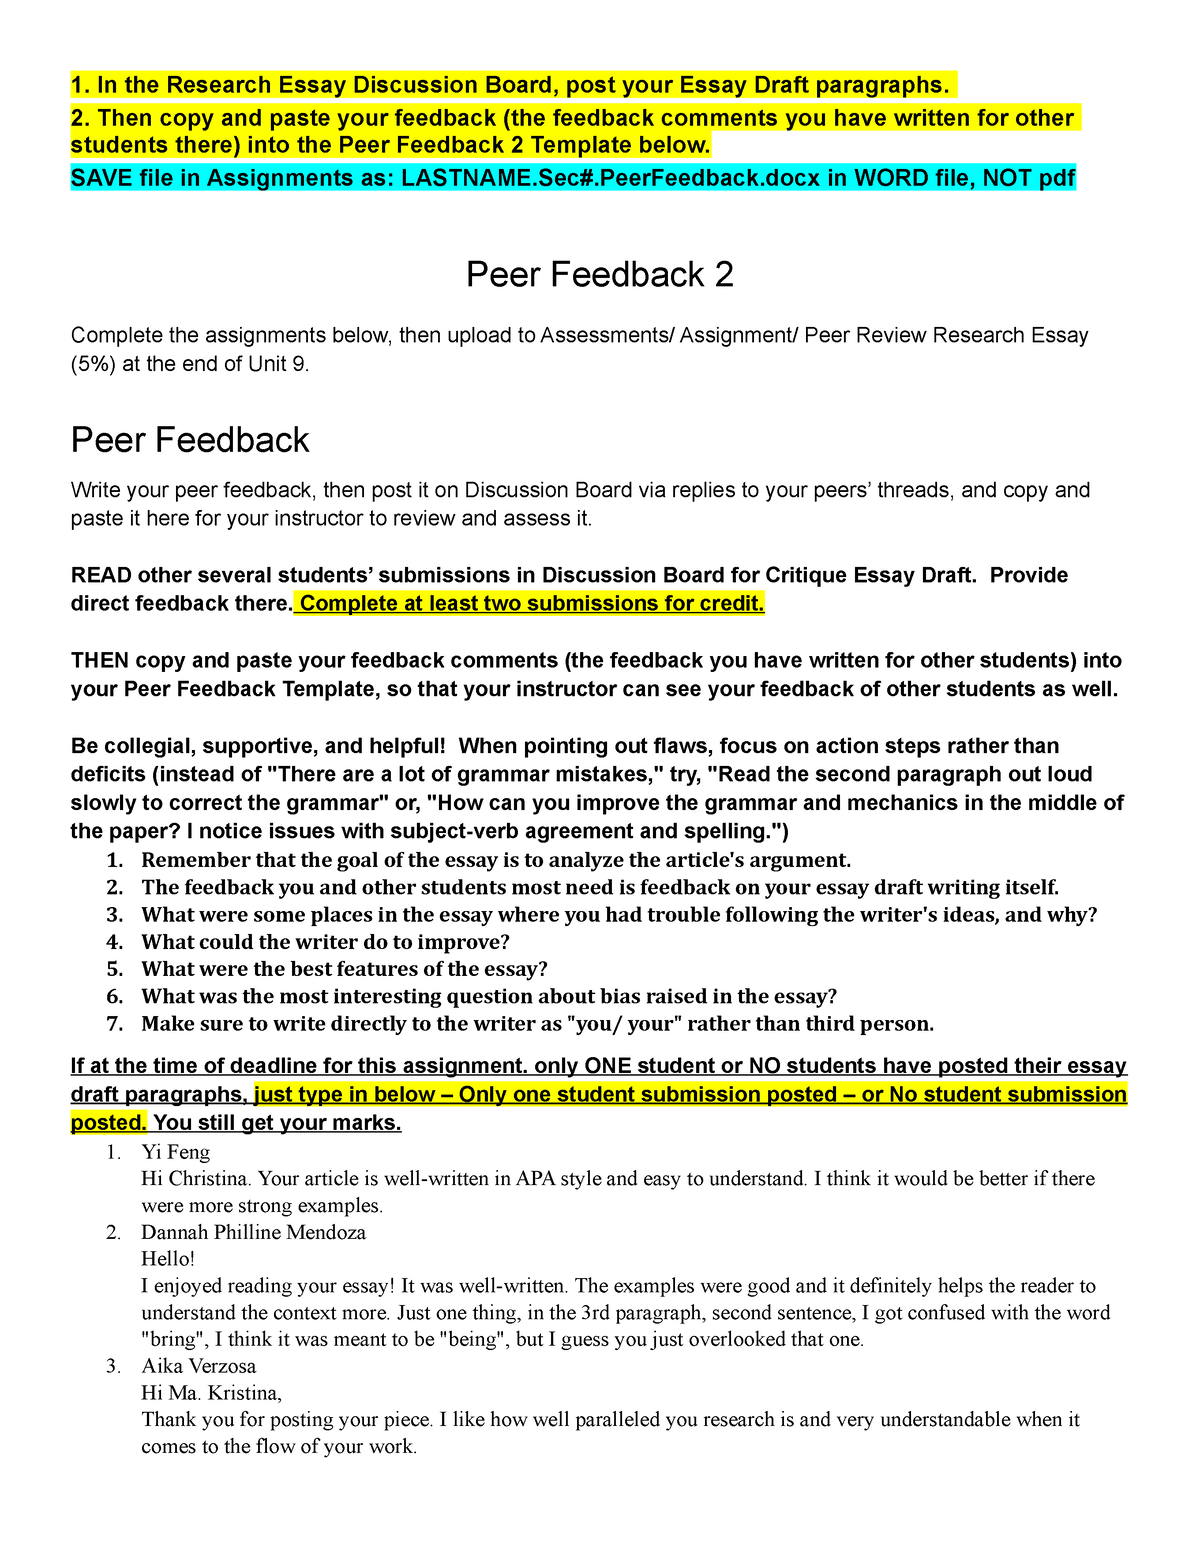 Peer Feedback Template 2 1 In The Research Essay Discussion Board